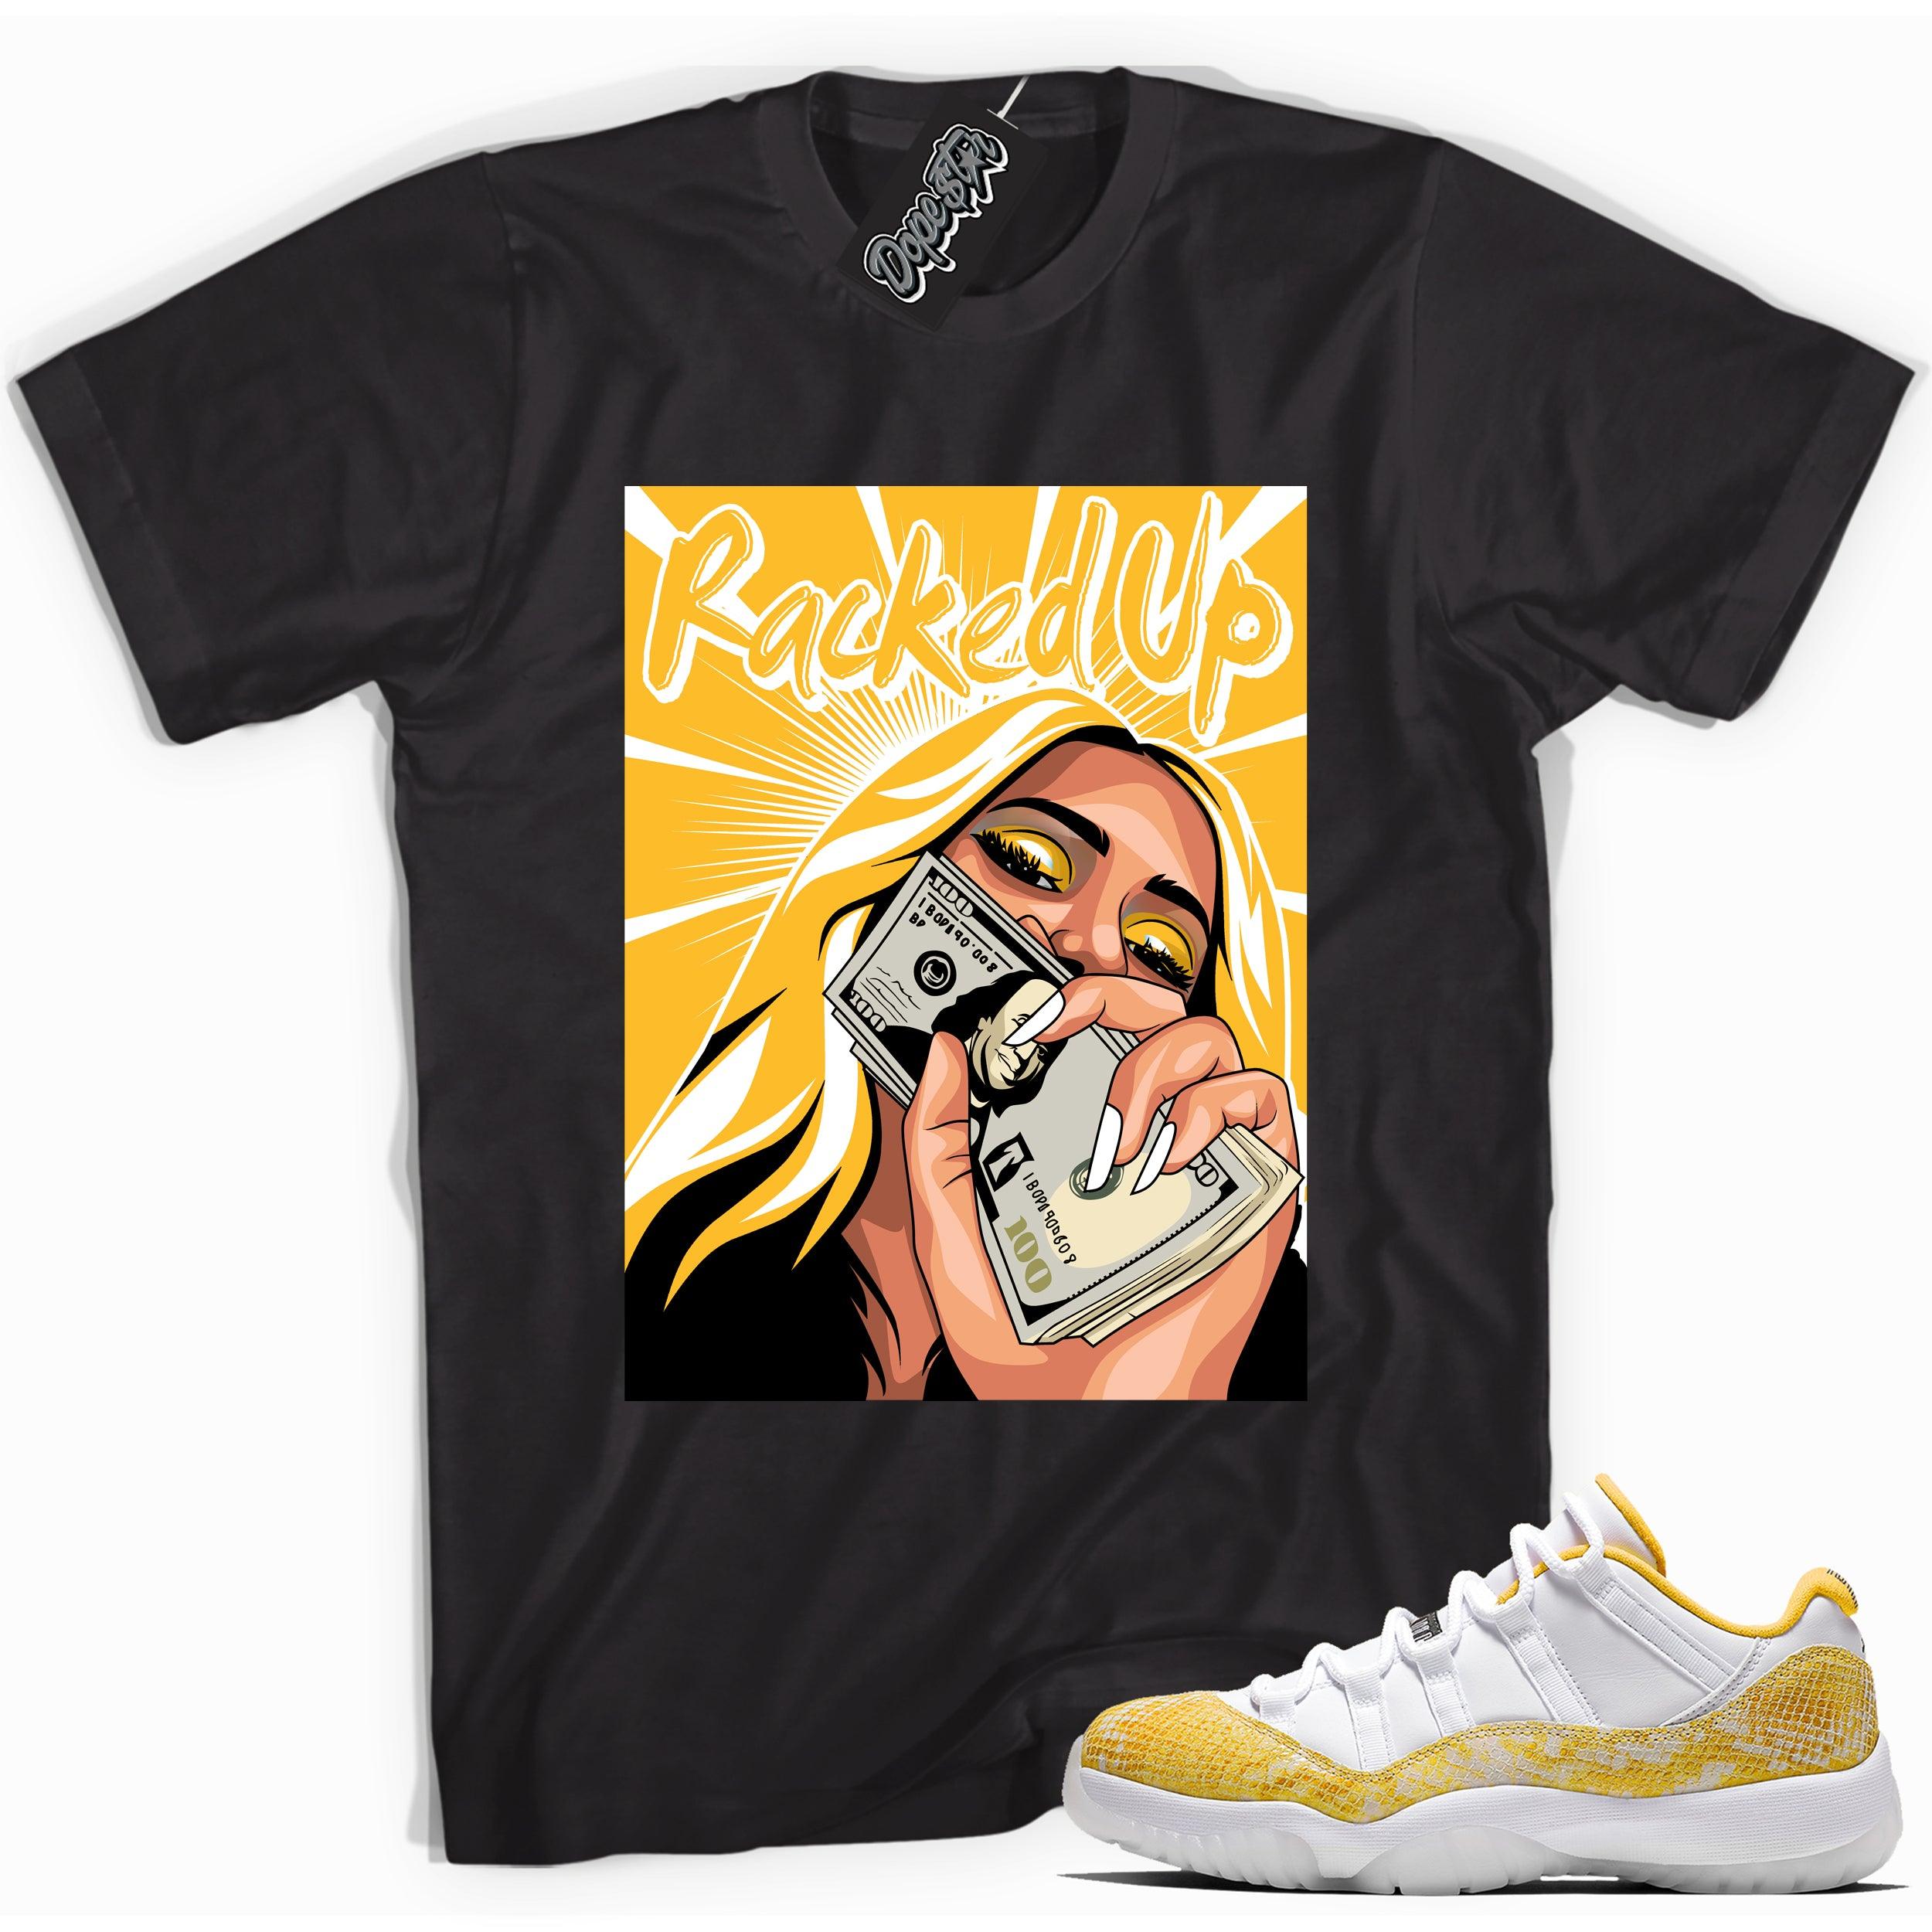 Cool black graphic tee with 'racked up' print, that perfectly matches  Air Jordan 11 Retro Low Yellow Snakeskin sneakers